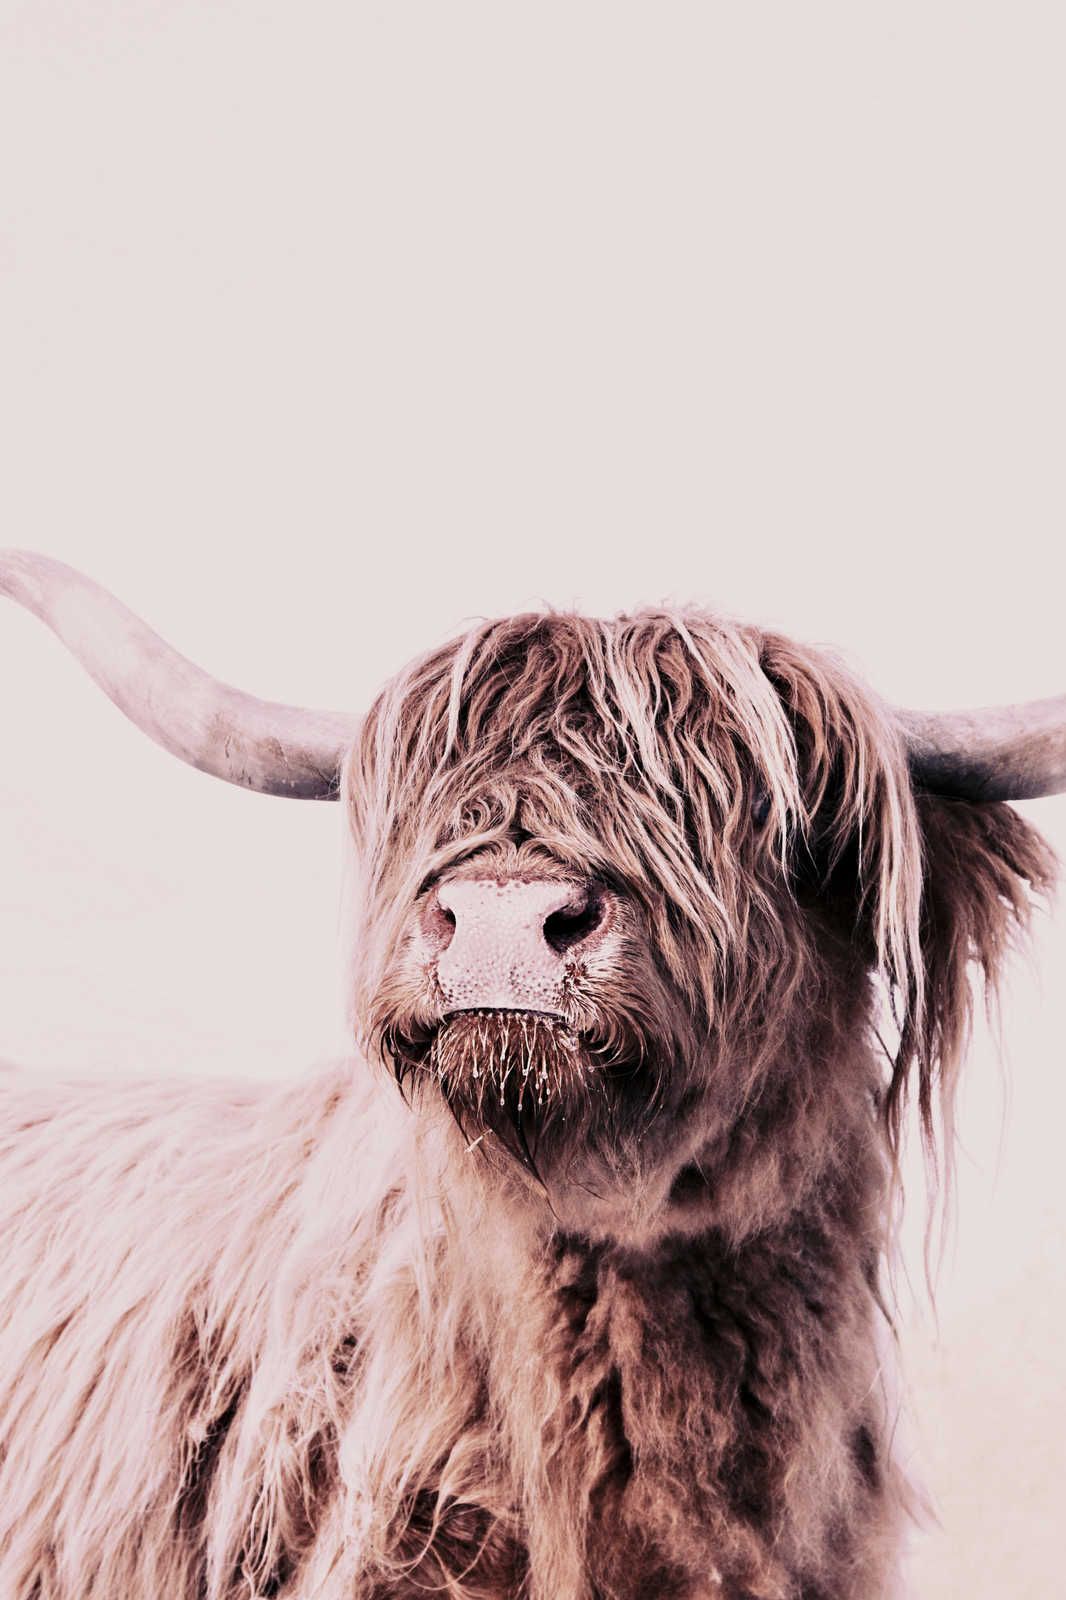             Canvas painting Highland Cattle Portrait in Sepia Style - 1,20 m x 0,80 m
        